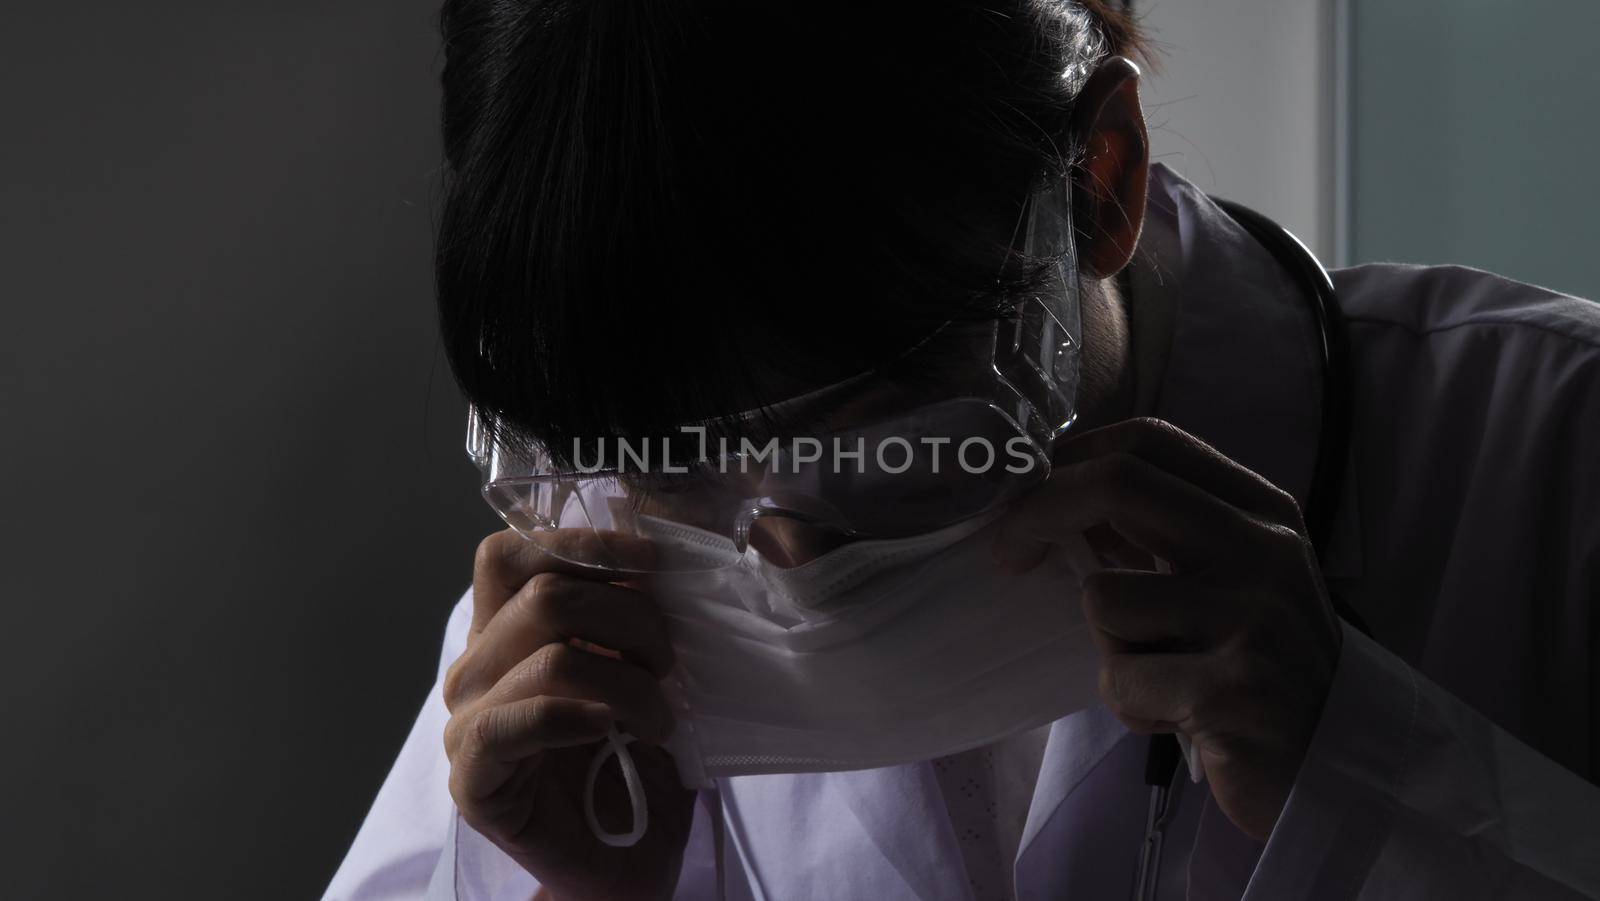 Doctor wearing protection face mask against coronavirus before work night ward by gnepphoto